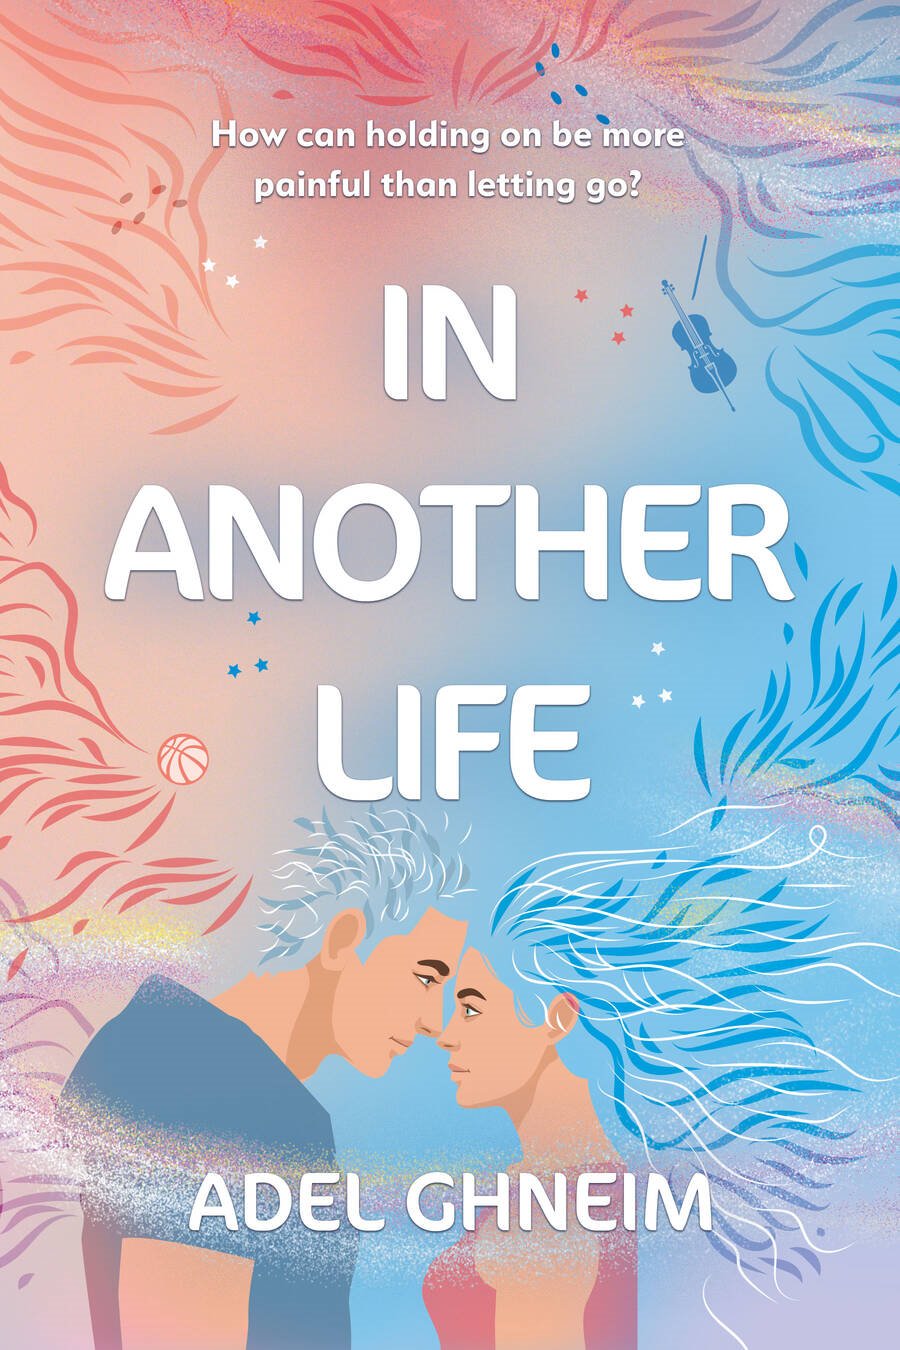 In Another Life - Adel Ghneim